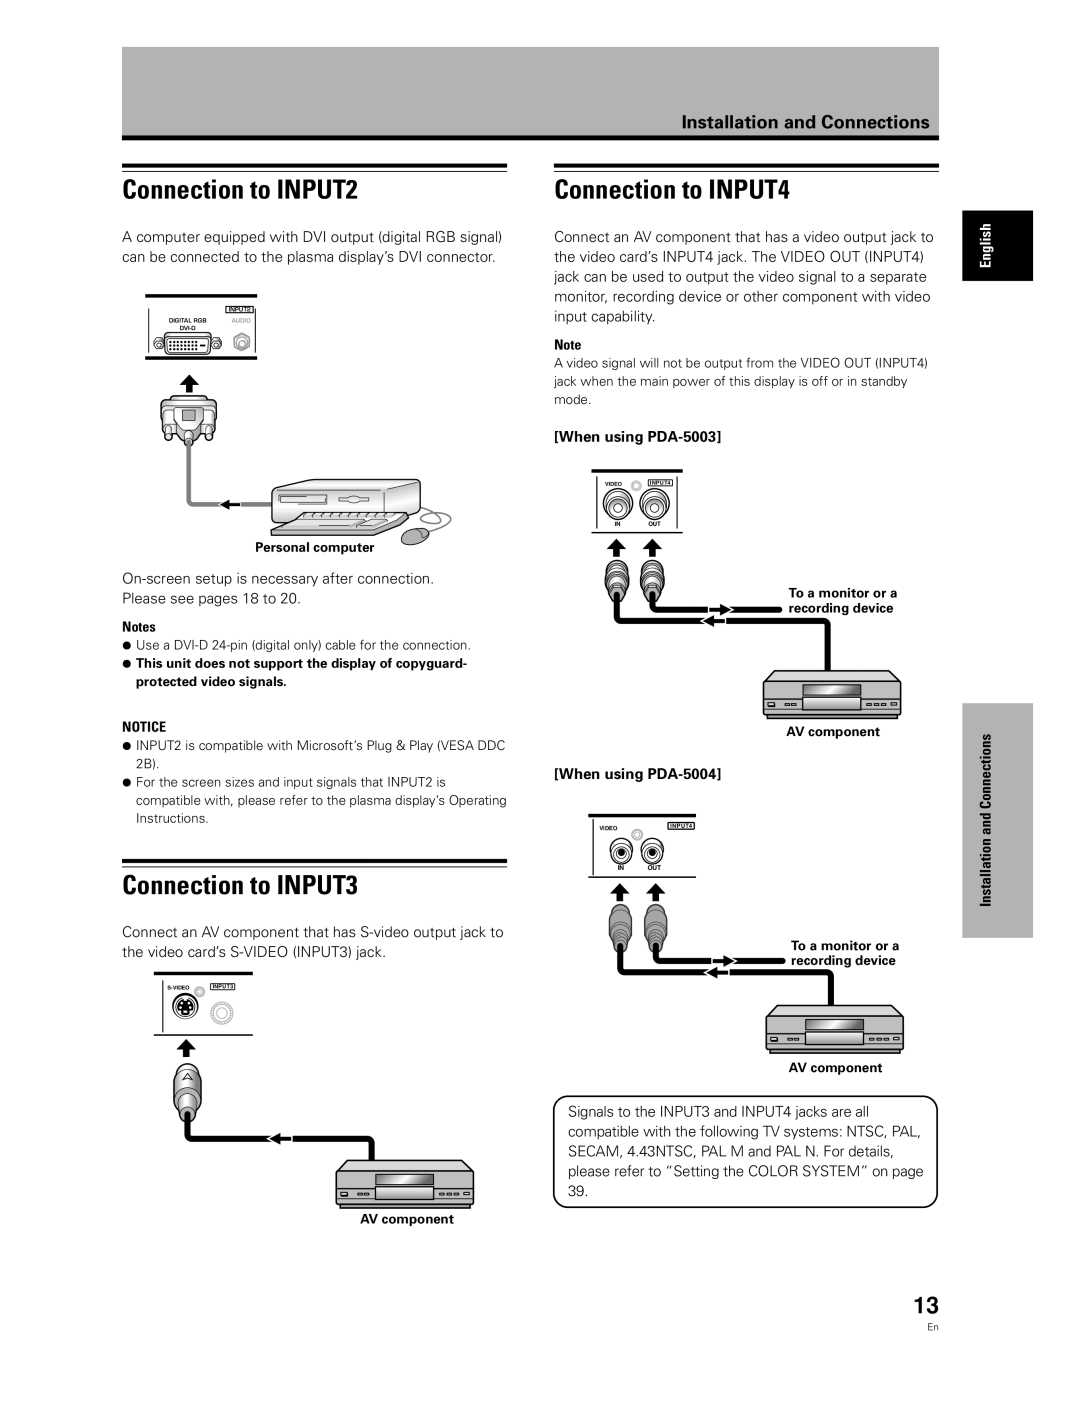 Pioneer Connection to INPUT2, Connection to INPUT4, Connection to INPUT3, When using PDA-5003, When using PDA-5004 